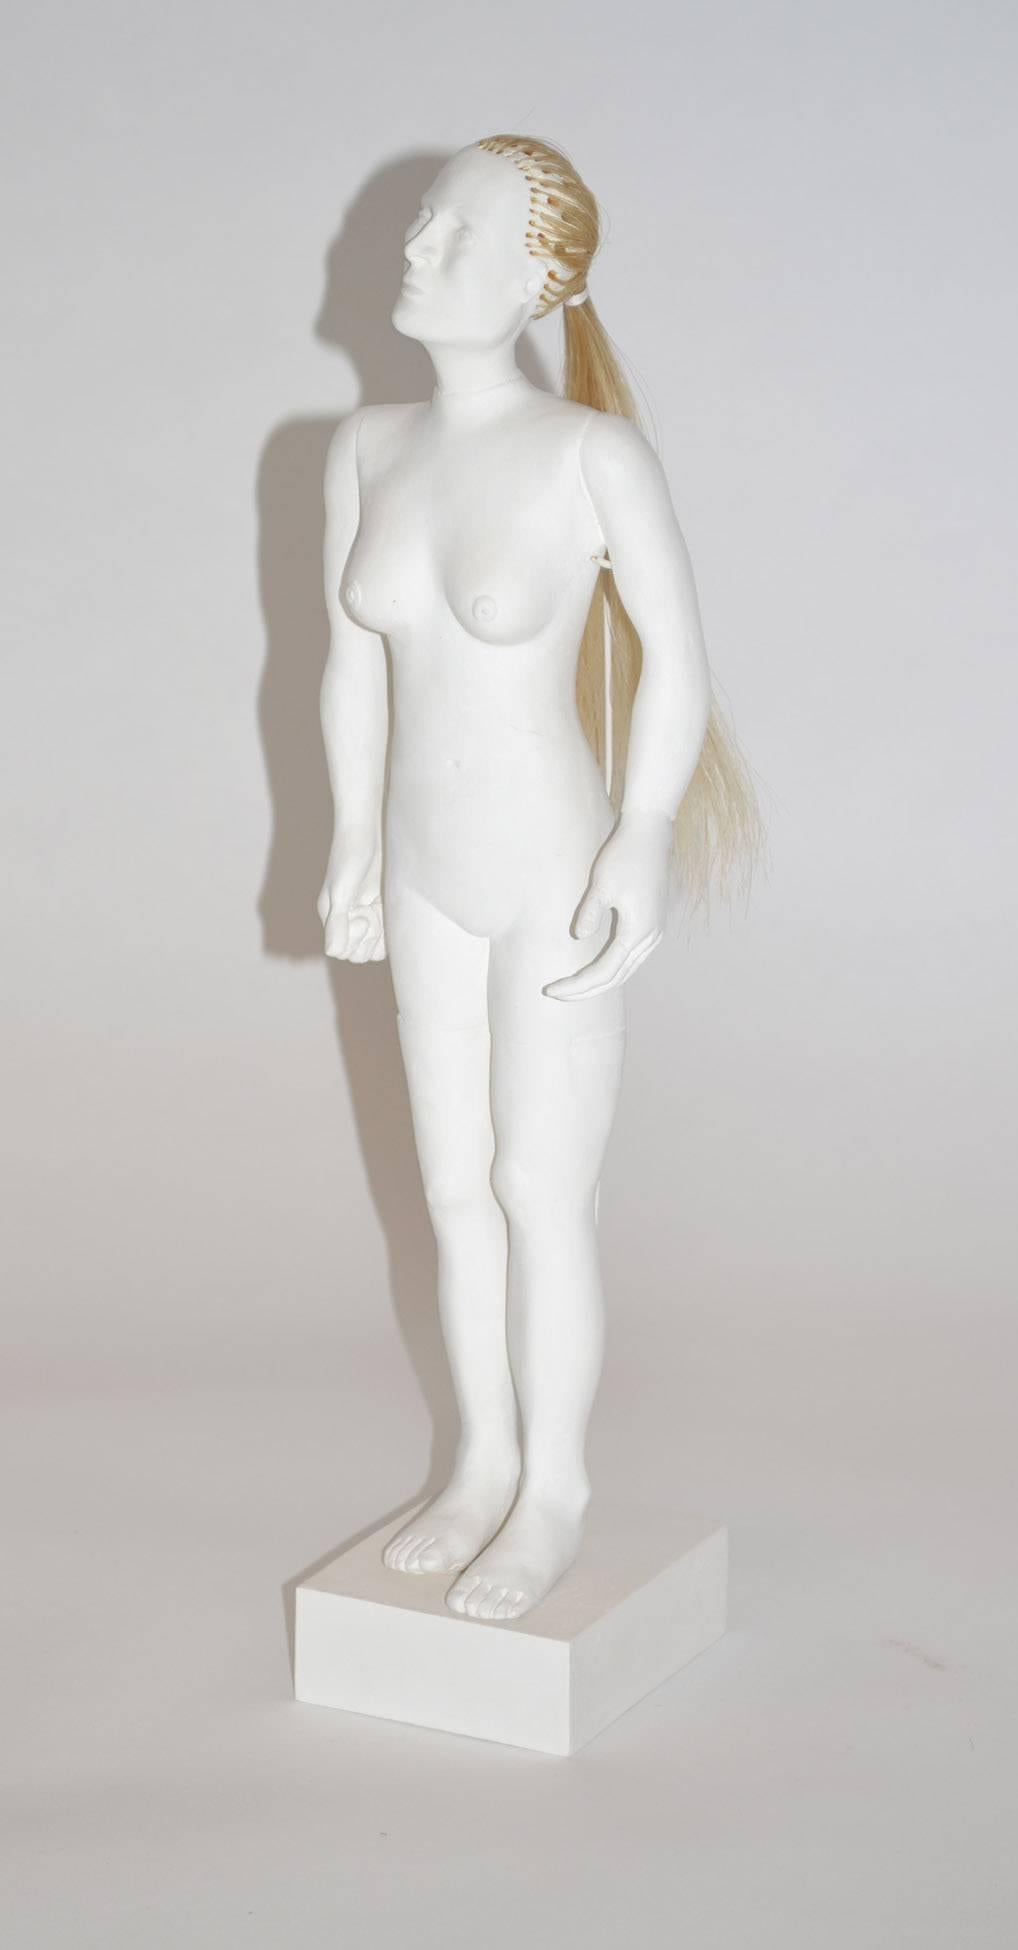 Sculpture by Judith Shea human female form mixed-media, 2002. Judith Shea (born 1948) empty form human form sculpture - The Doll. Mixed-media with applied hair. Good condition with custom stand. White color plaster with original finish. De